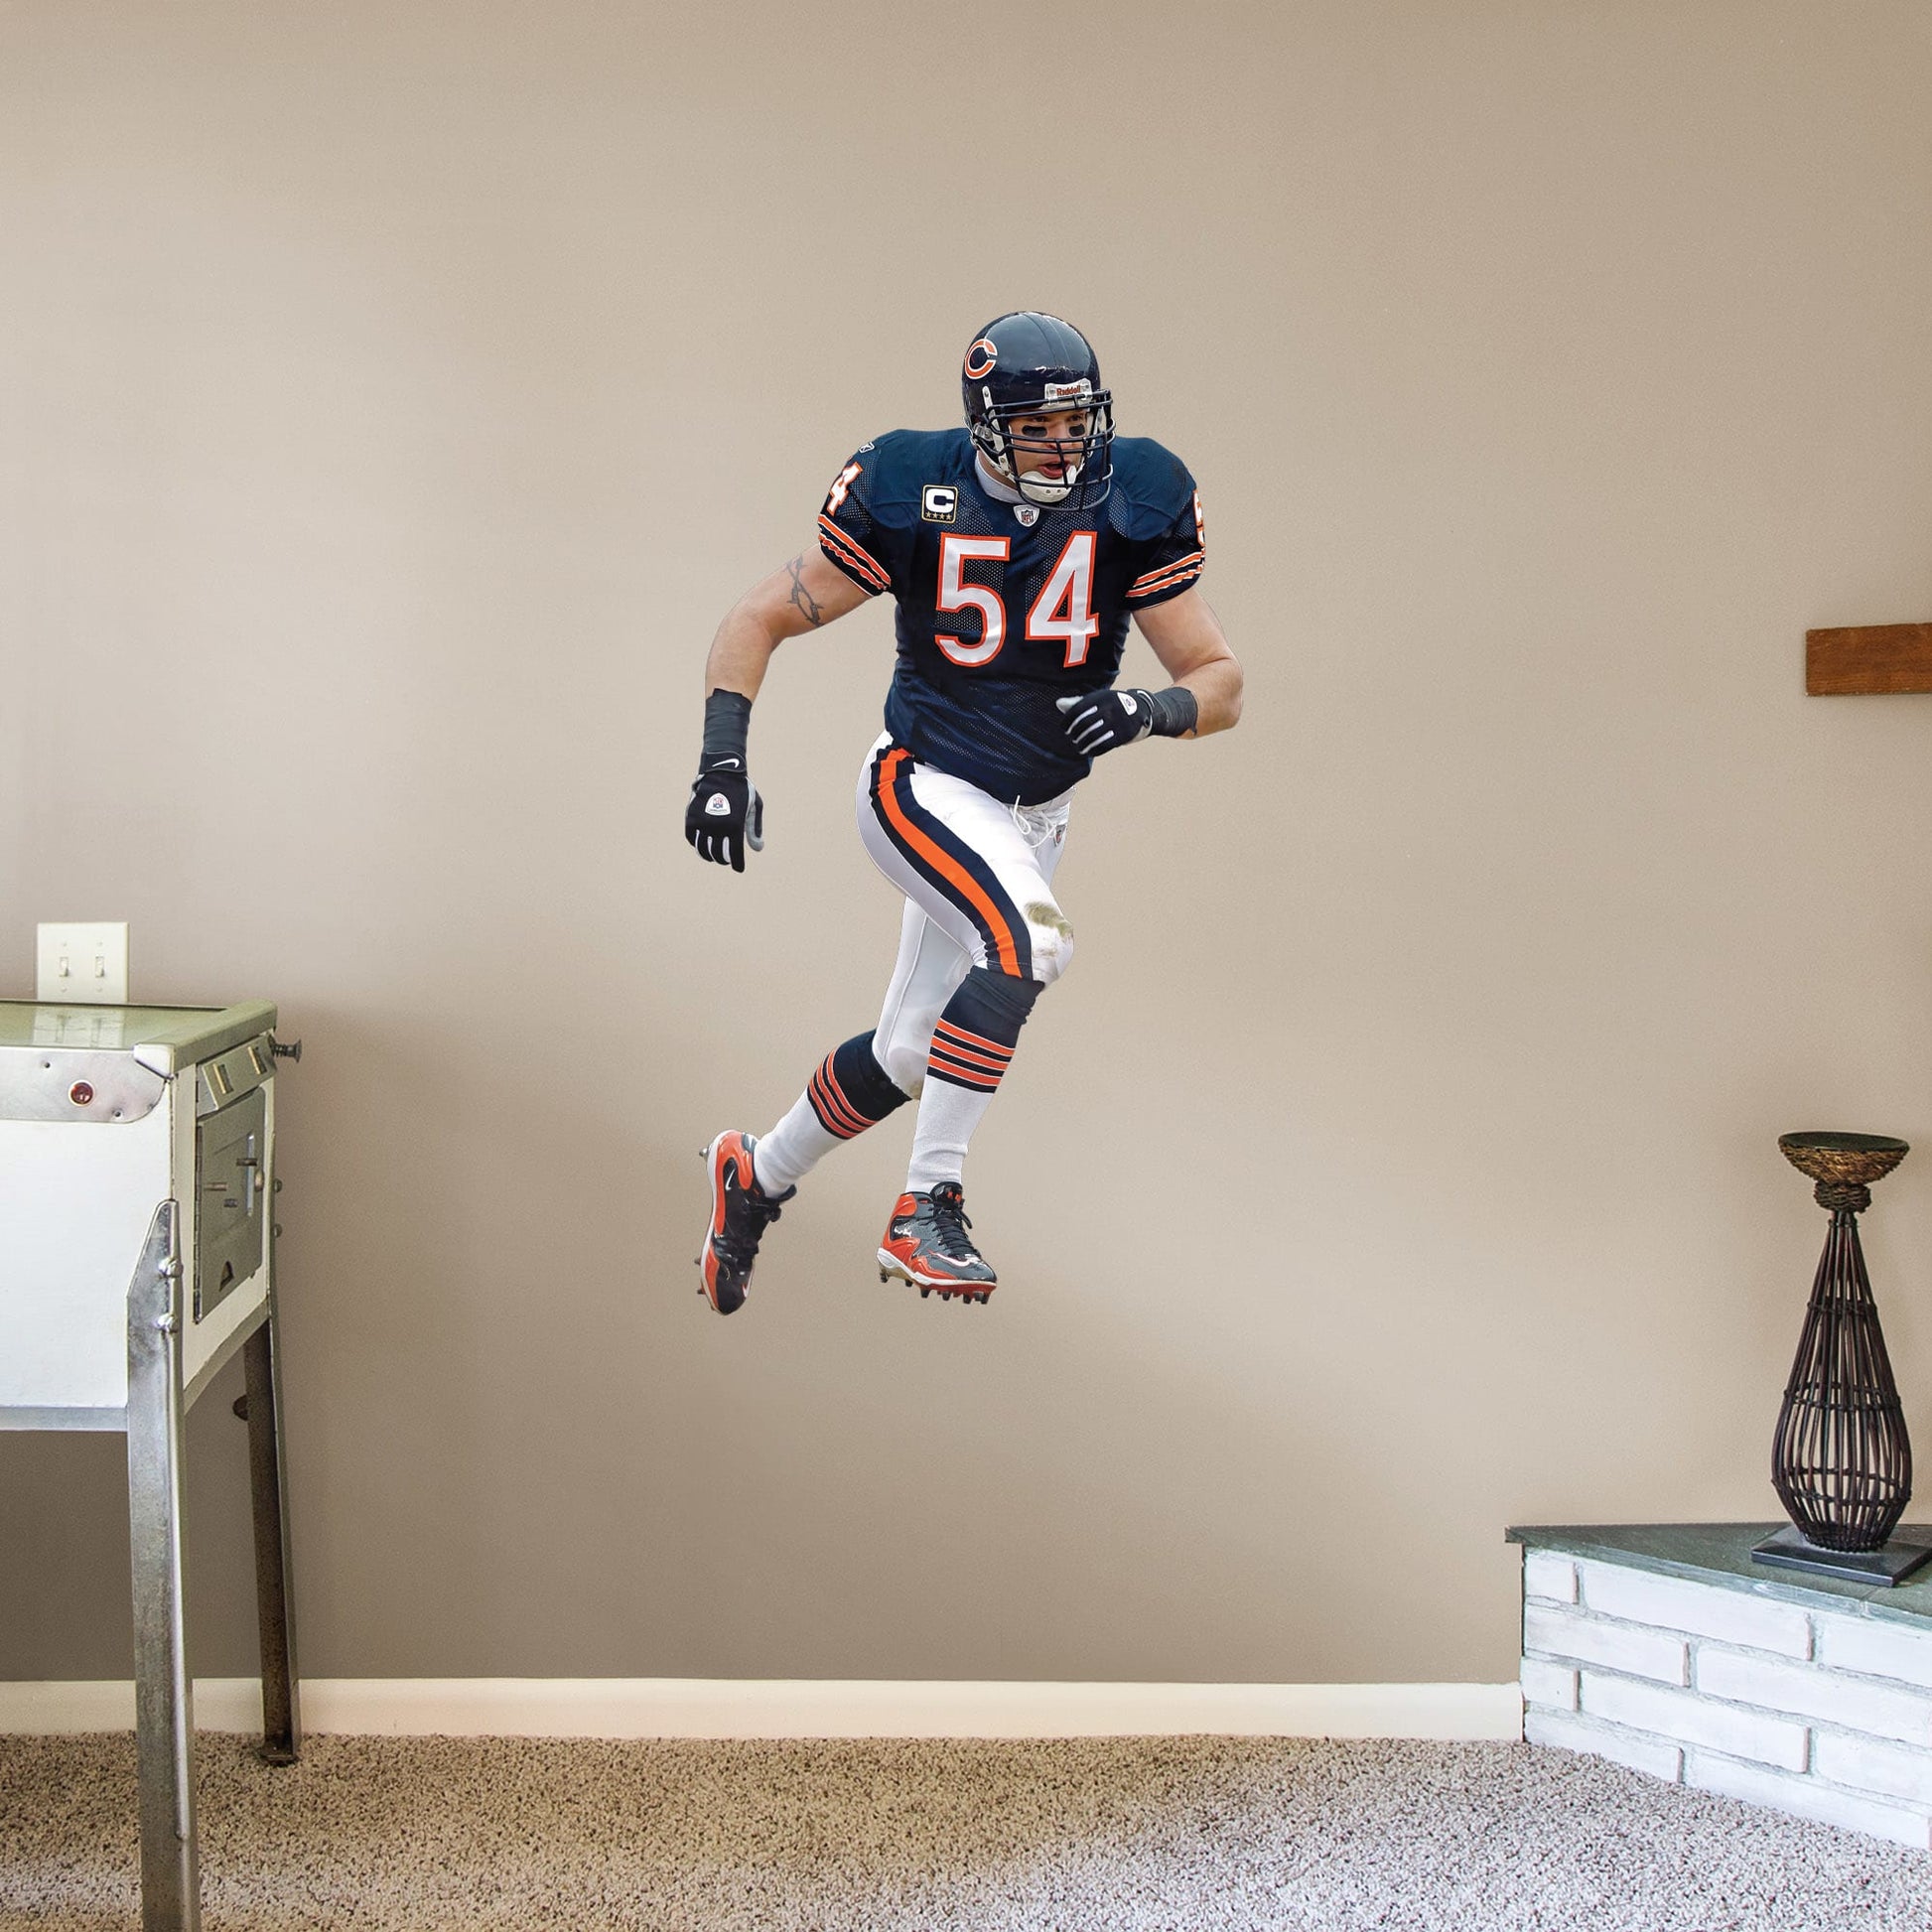 Giant Athlete + 2 Decals (28"W x 51"H) For 13 years, the Chicago Bears watched #54 earn his place as one of the Top 100 Bears of All time. Rep the navy blue and burnt orange with a high-grade vinyl decal of Da Bears legend Brian Urlacher. Removable, reusable, and tear-resistant, this Hall of Famer is great for bedrooms, man caves, or even as a temporary party decoration. Bear down, Chicago Bears!